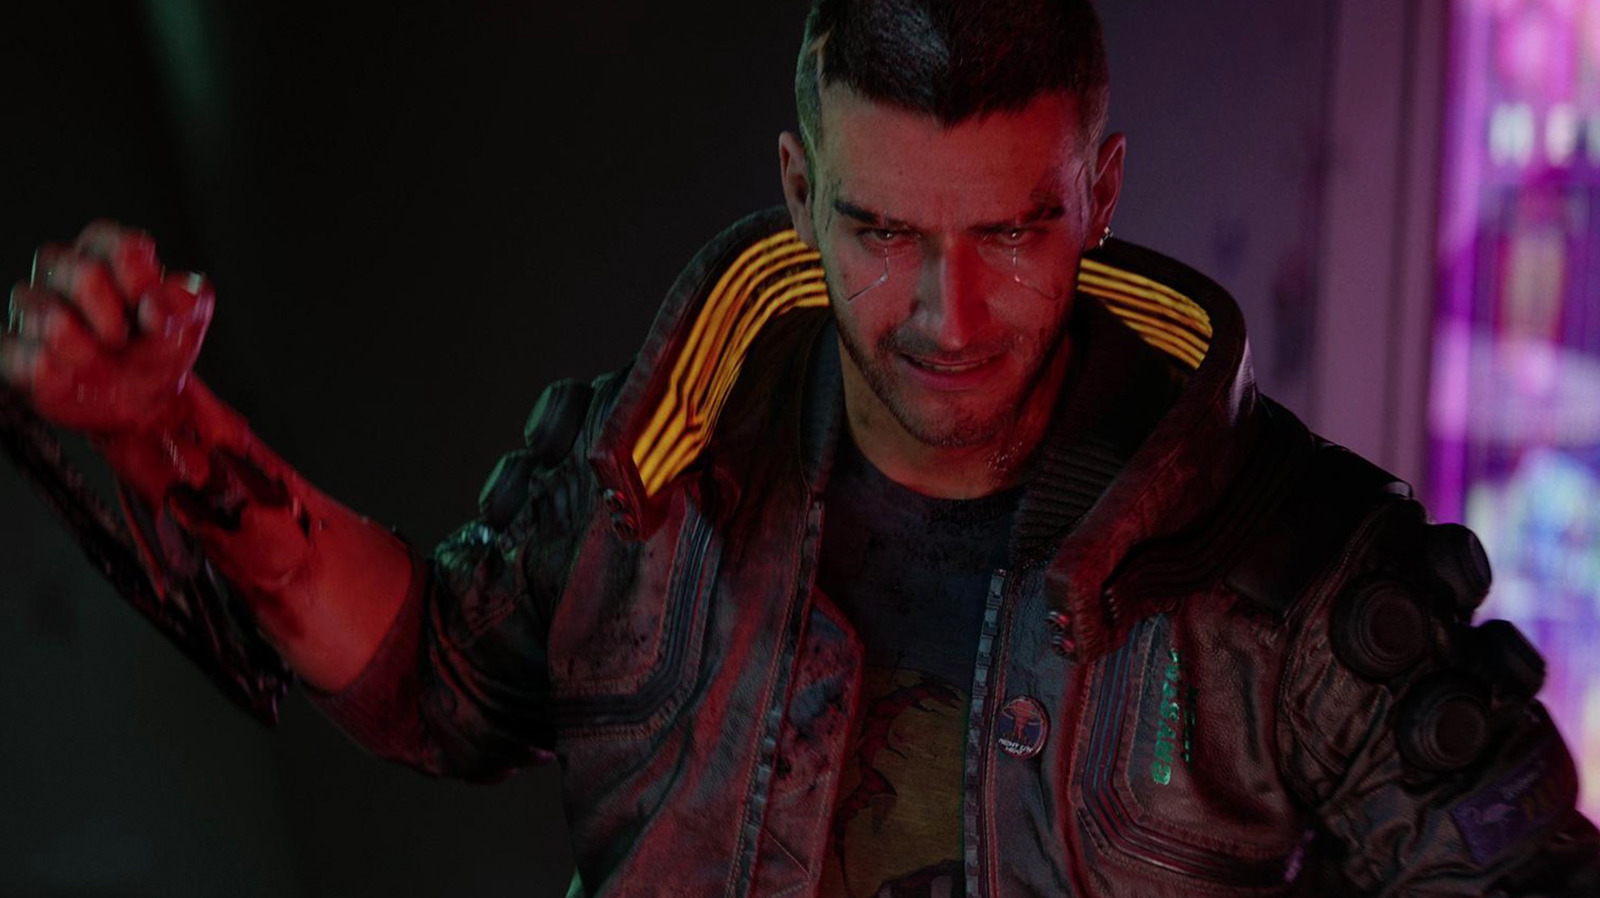 This is the easiest way to make money in Cyberpunk 2077